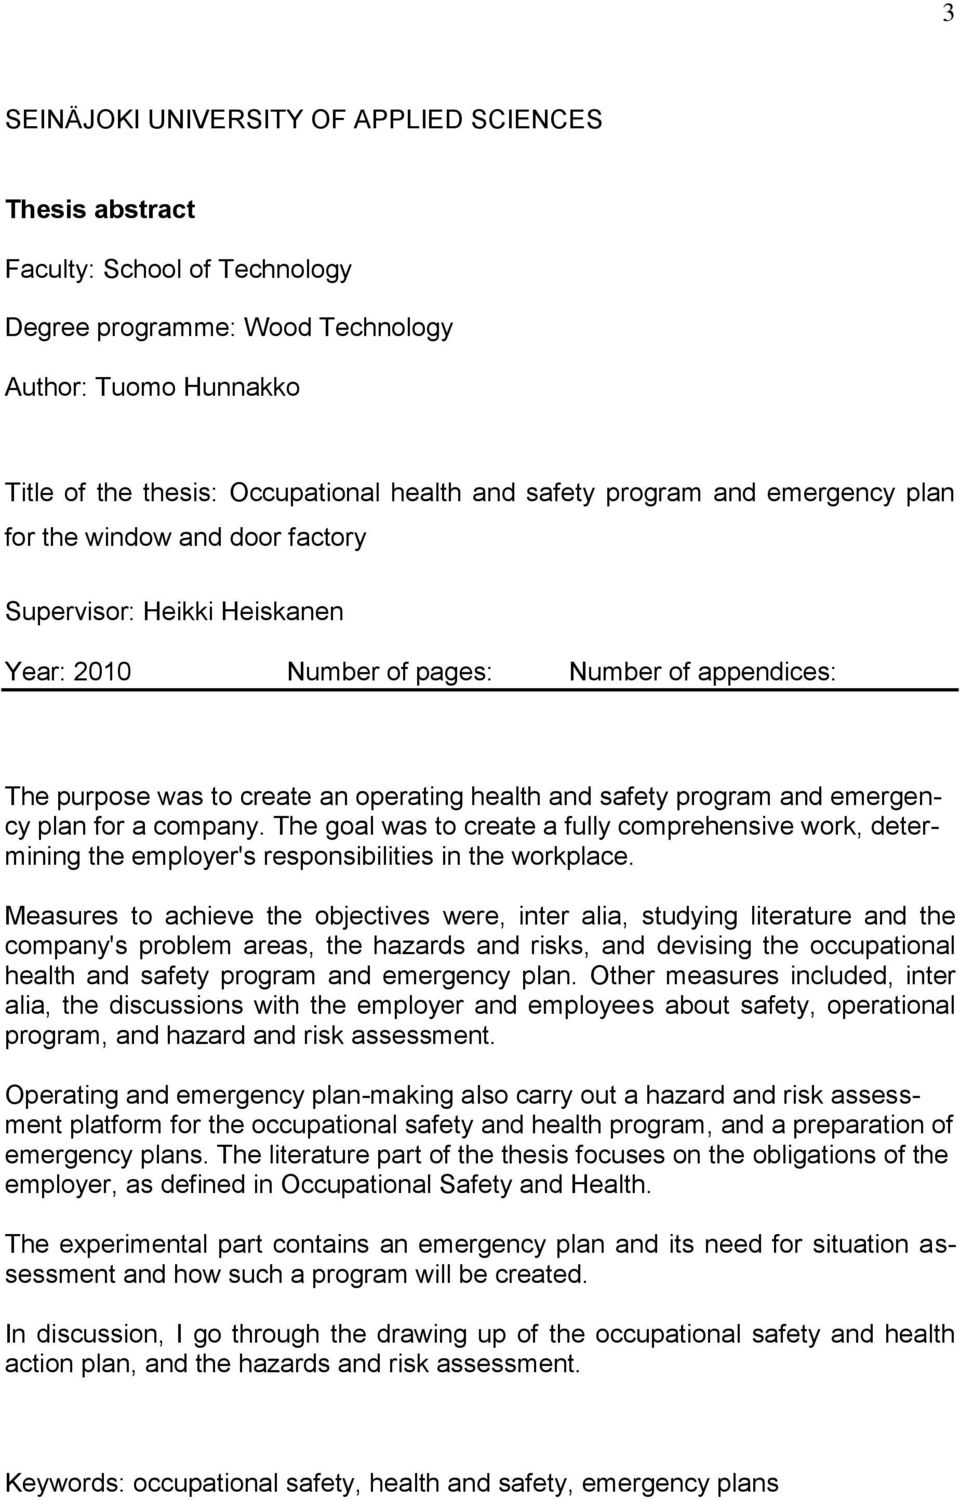 program and emergency plan for a company. The goal was to create a fully comprehensive work, determining the employer's responsibilities in the workplace.